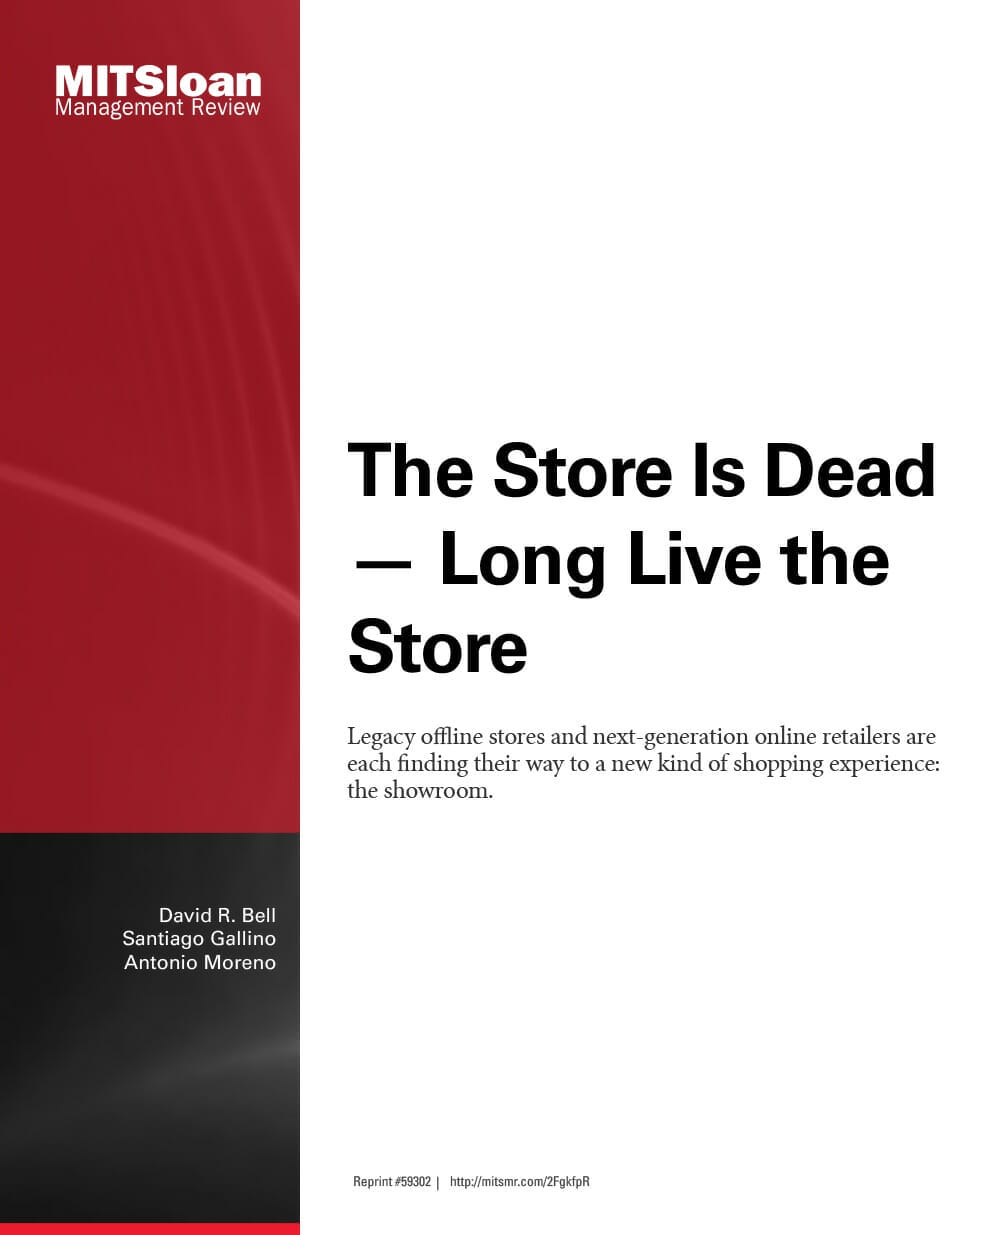 Bell - The Store is Dead